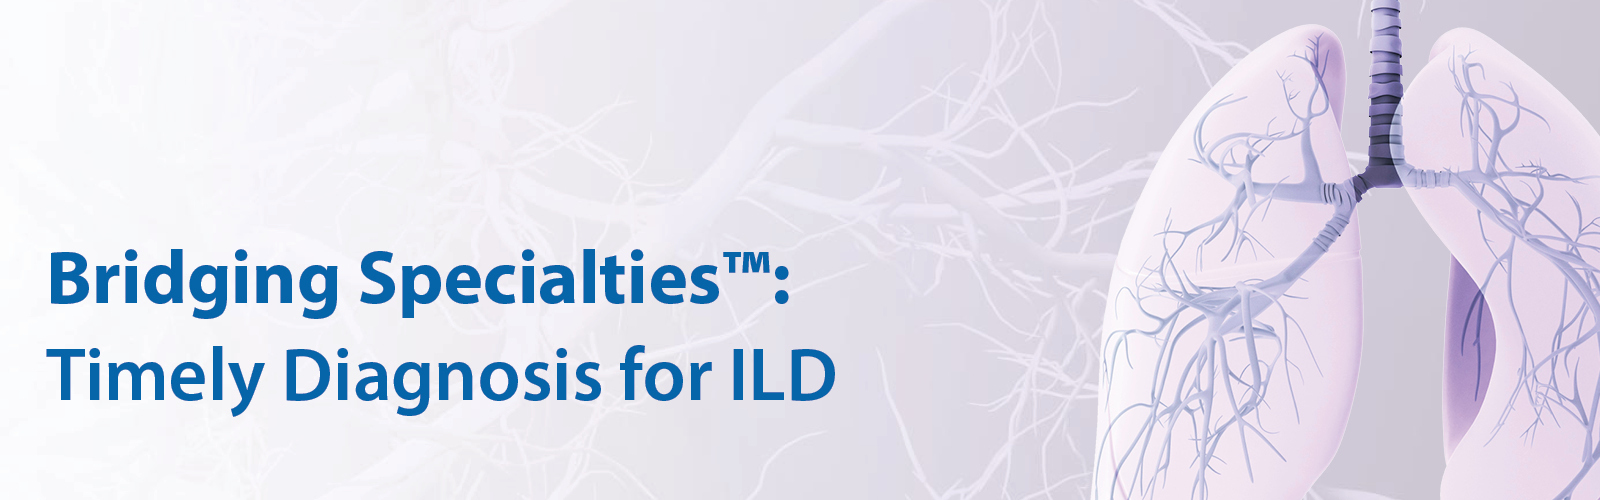 Bridging Specialties: Timely Diagnosis for ILD